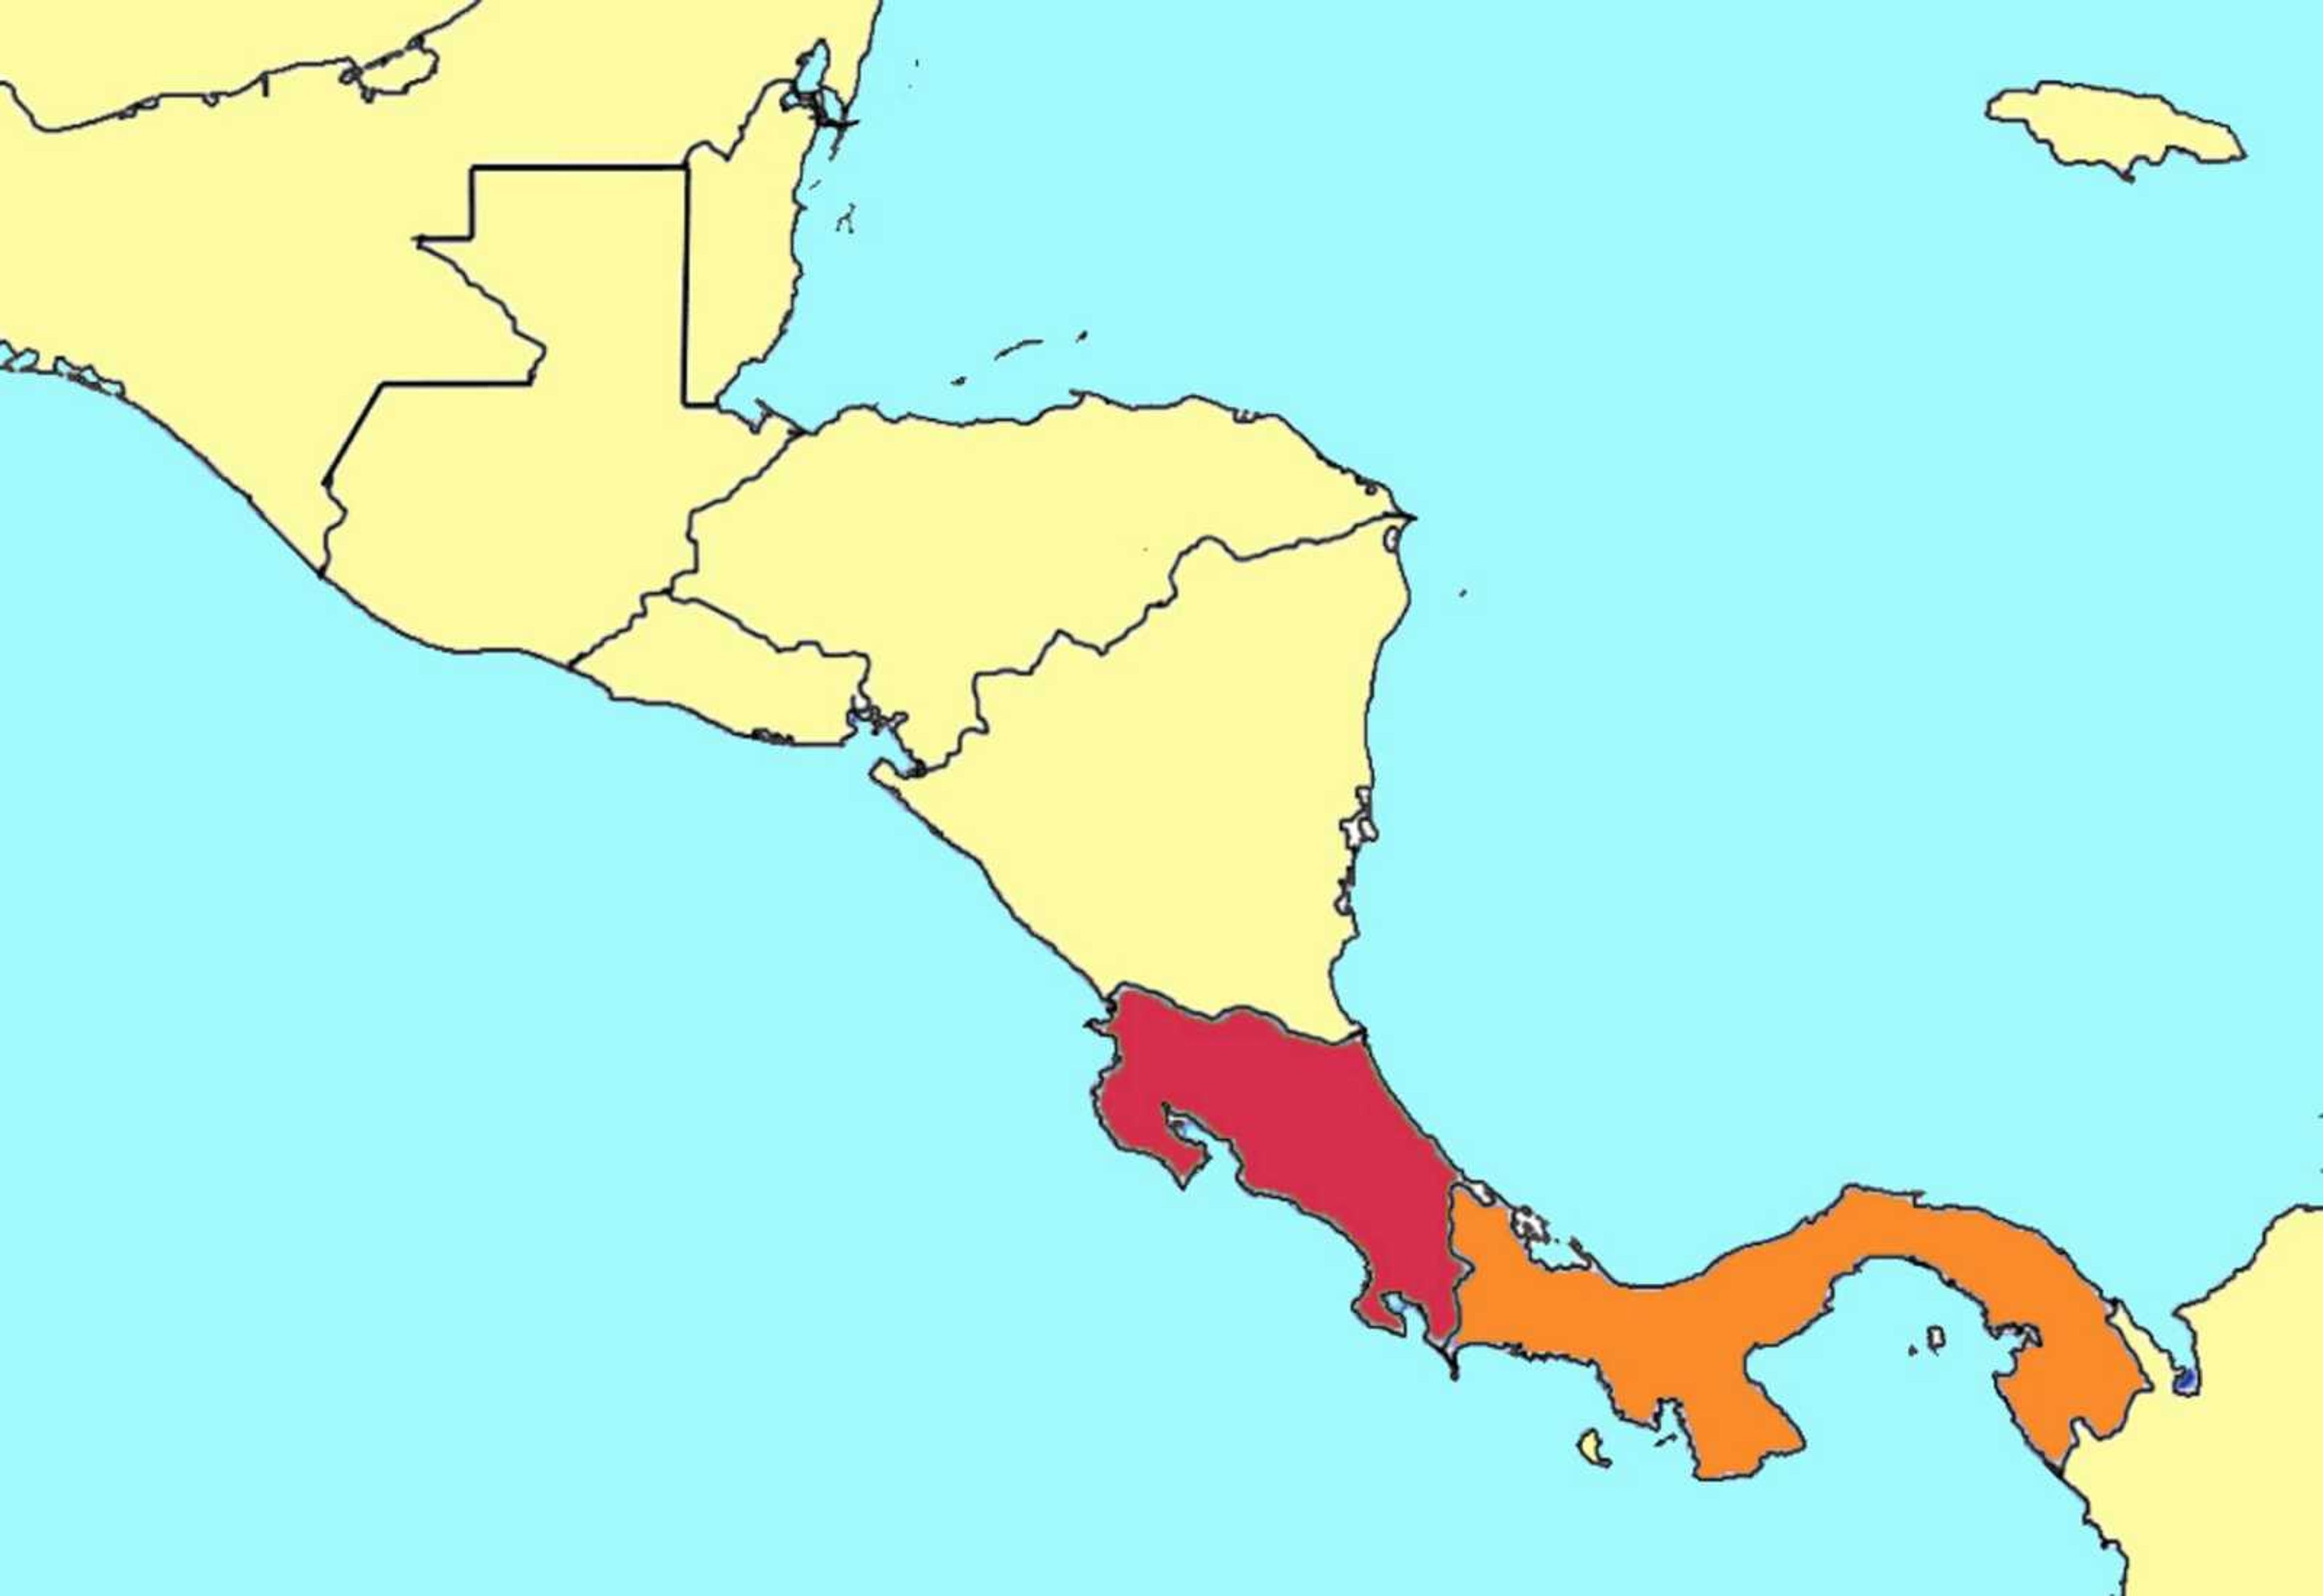 Dr. Vargas and a number of faculty members vistied Costa Rica (red) and Panama (orange) to connect with alumni in the area. Map from Lesson Planet